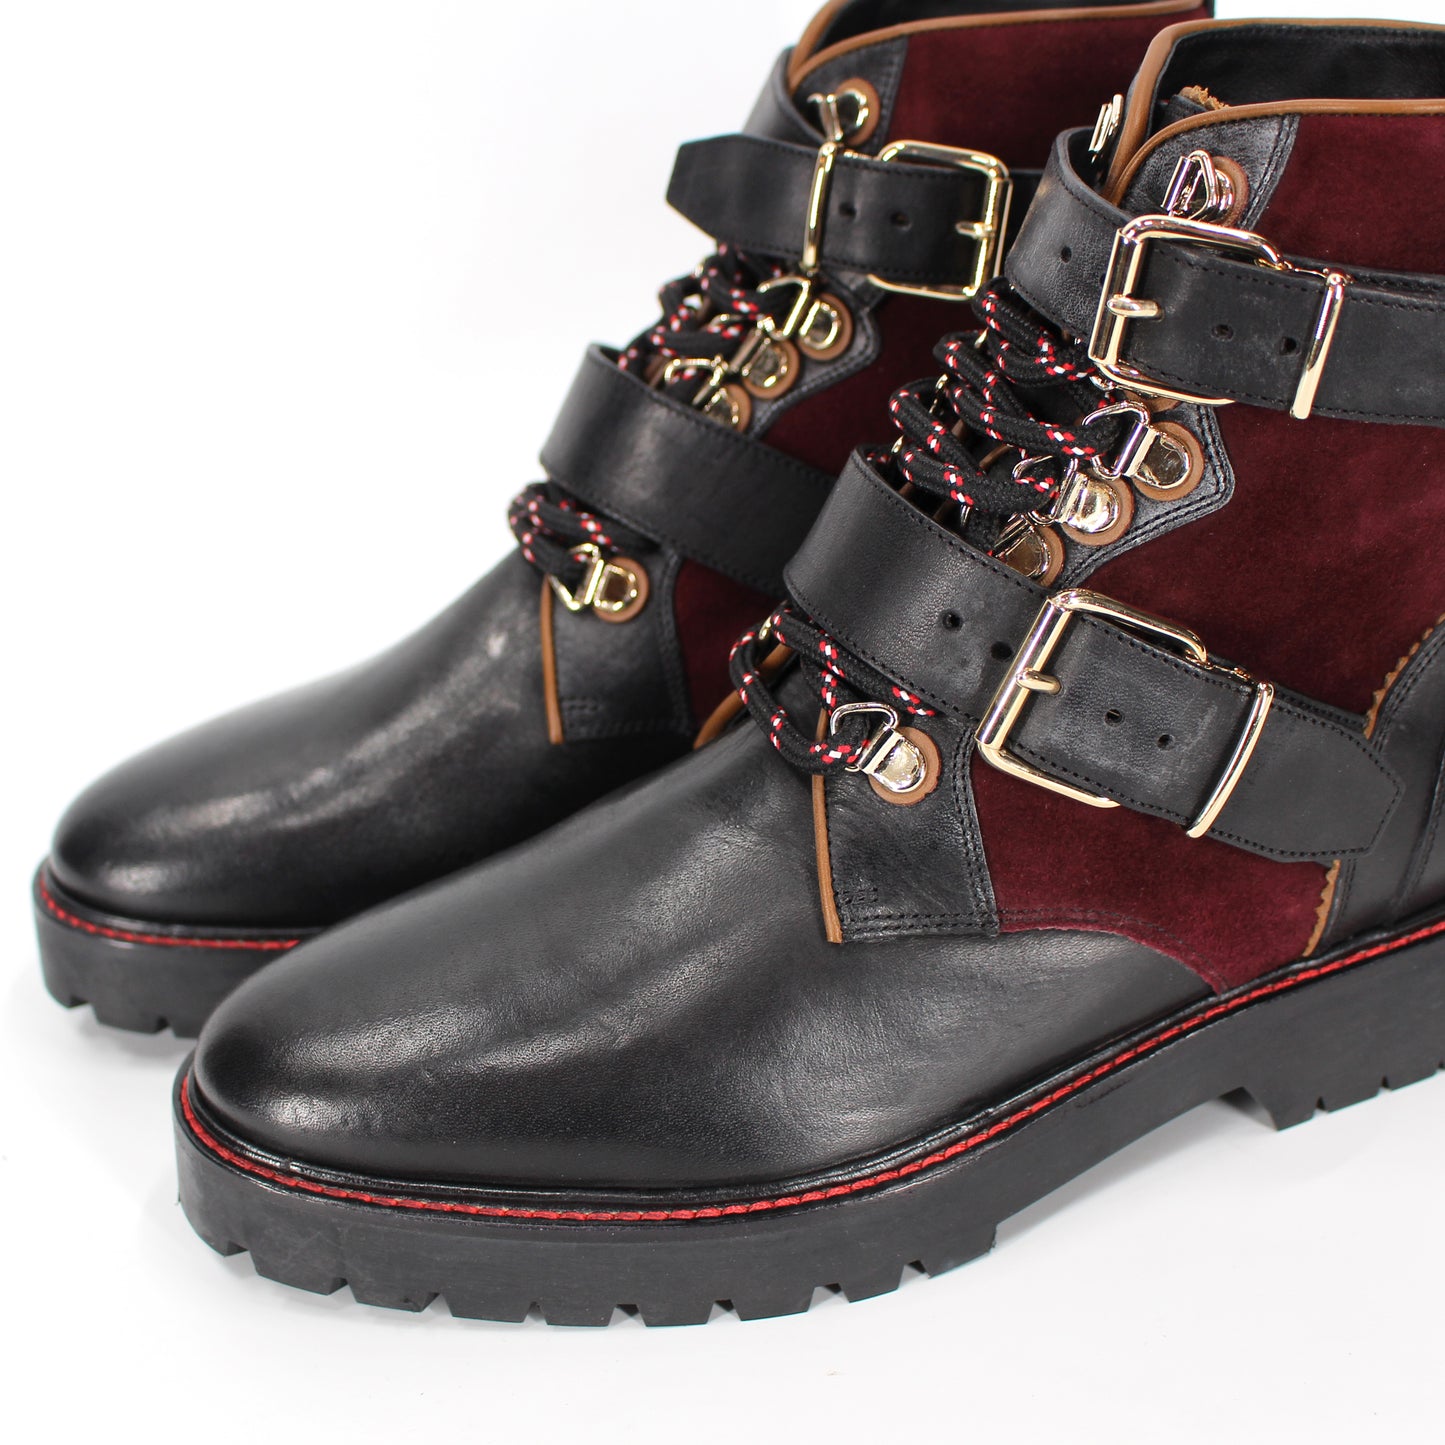 Burberry Utterback Ankle Booties